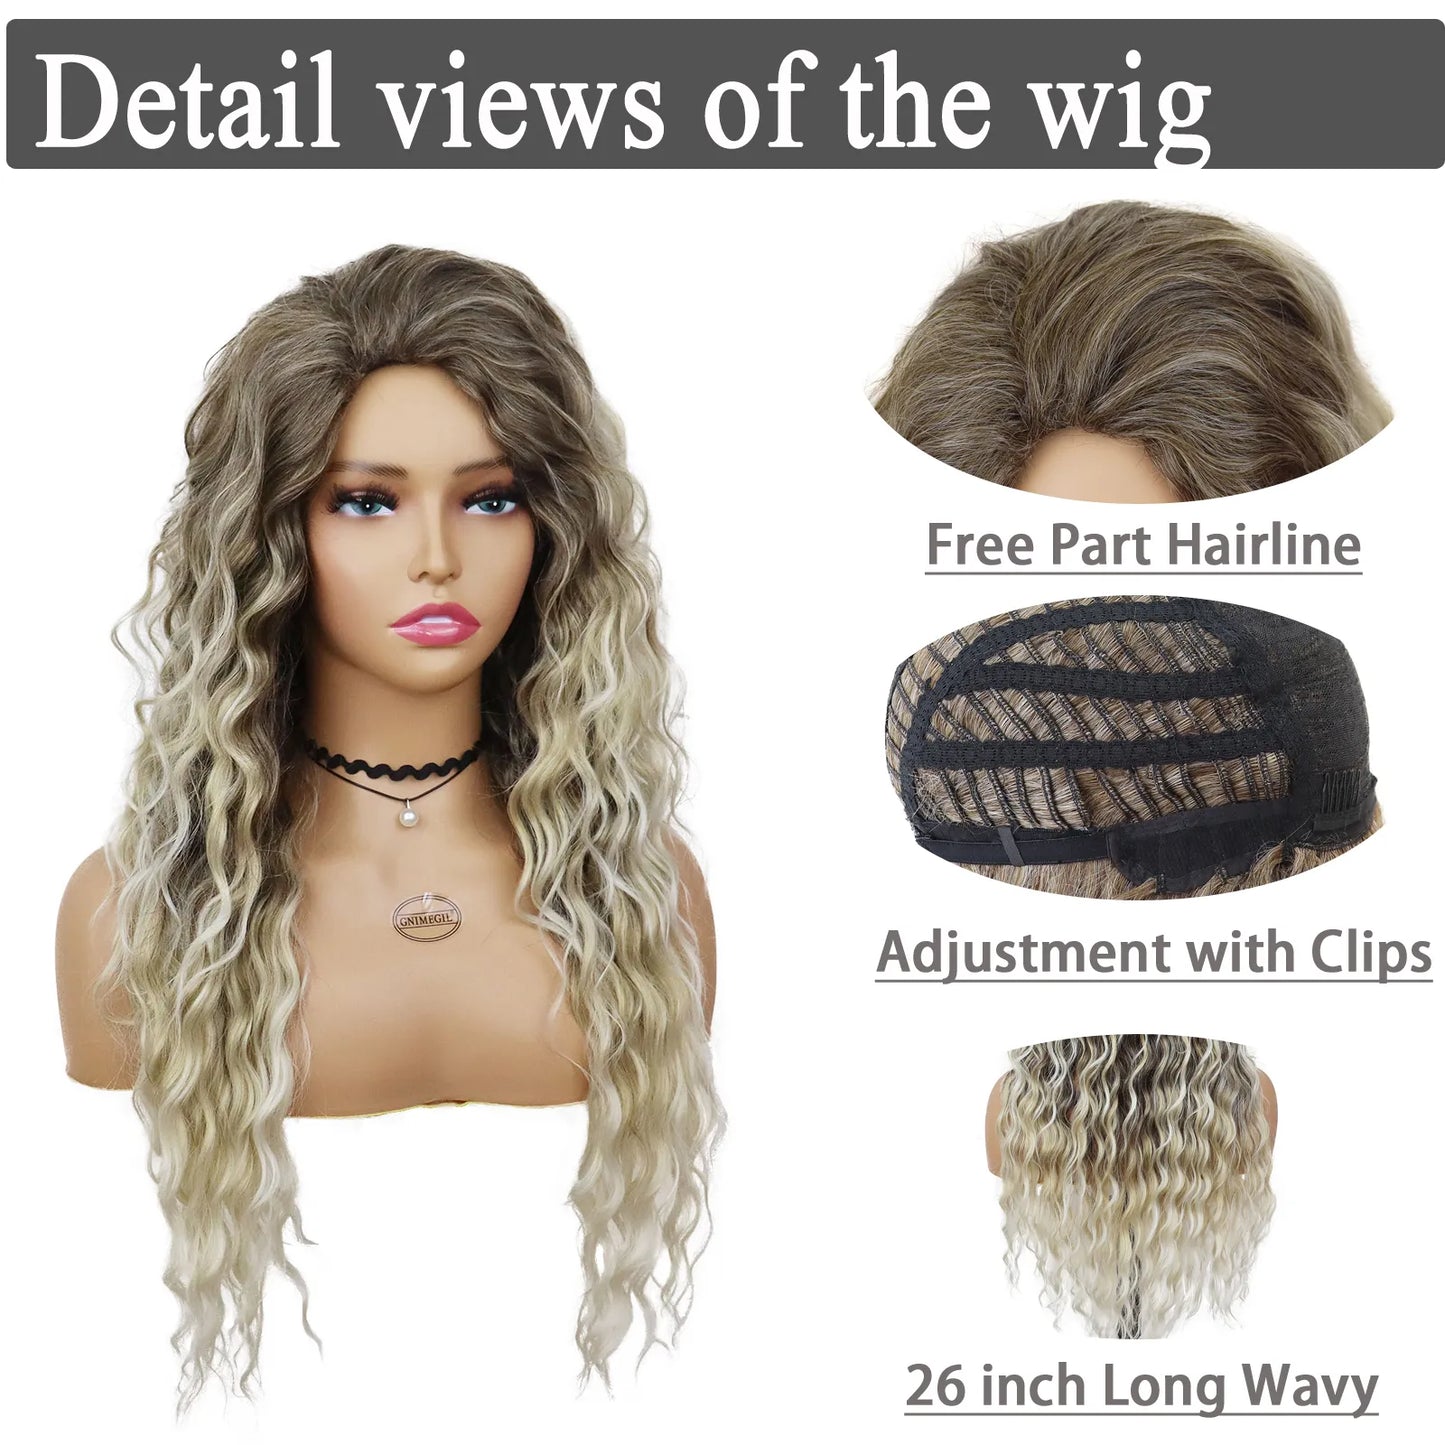 Ash Blonde Wig Synthetic Long Curly Hair Wigs for Women Fluffy Hairstyle Wave Ombre Wig Costume Carnival Party Regular Curly Wig